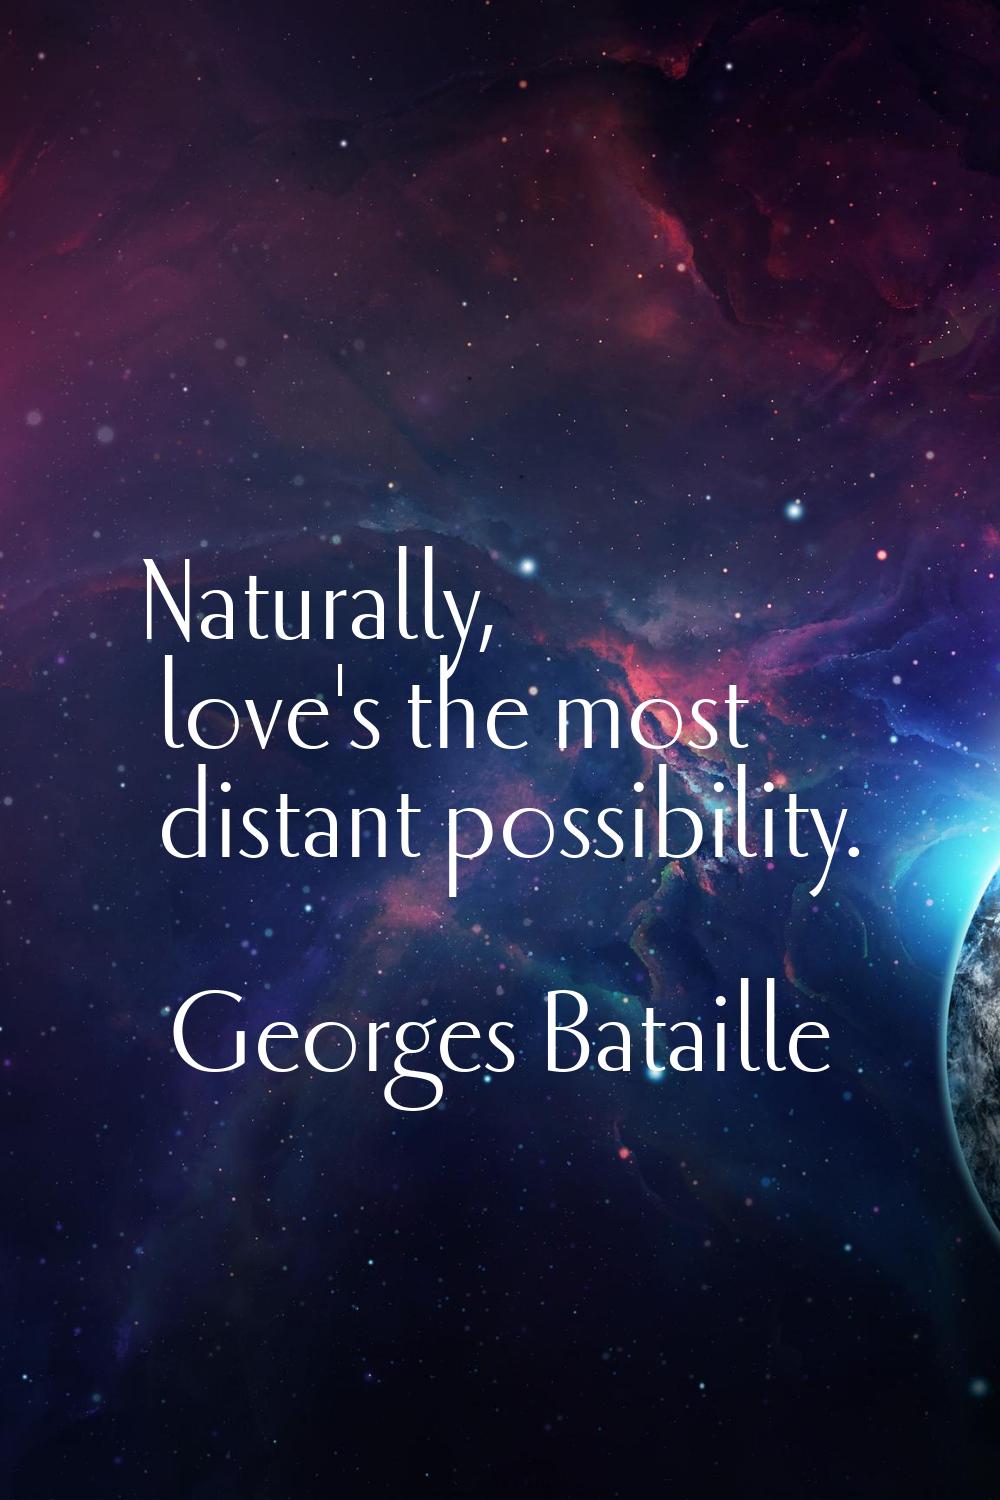 Naturally, love's the most distant possibility.